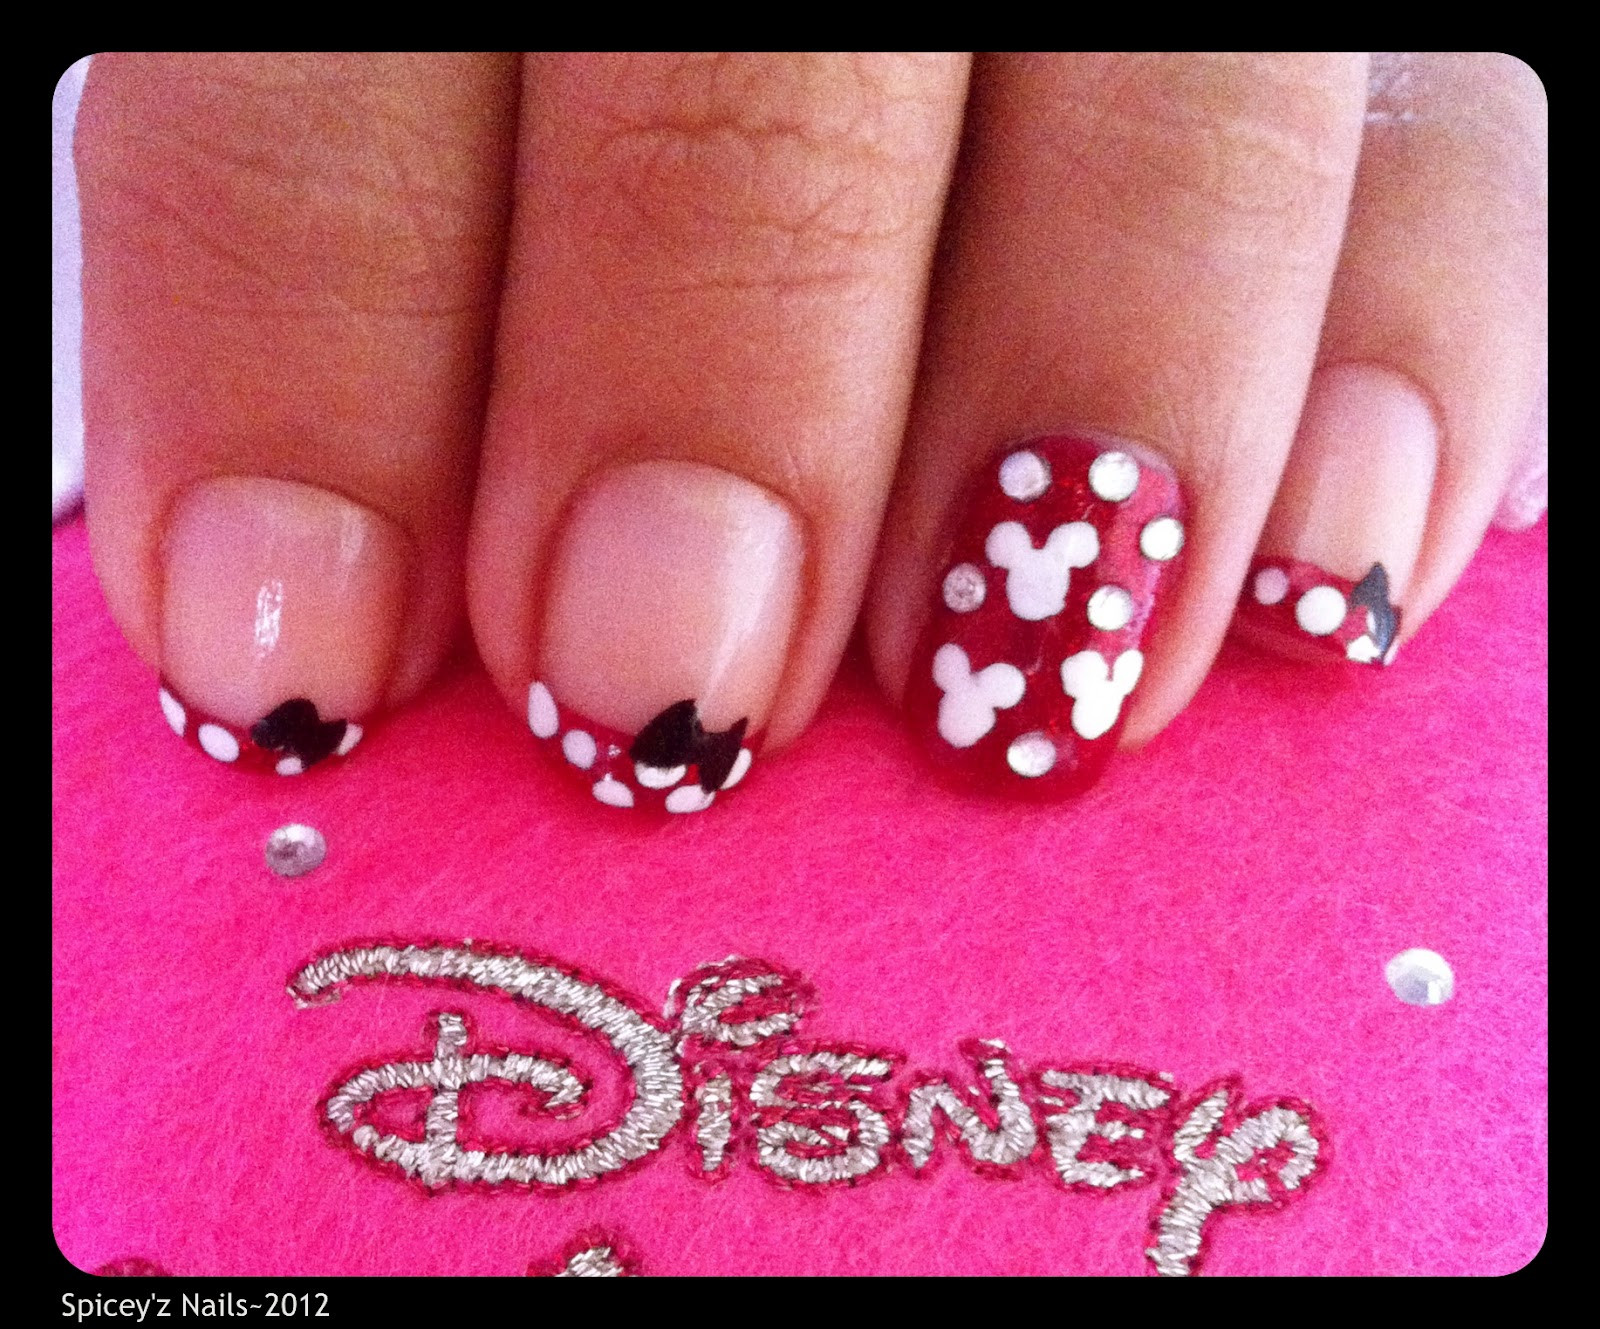 Minnie Mouse Nail Art
 Spicey z Nails Minnie Mouse Nail Art